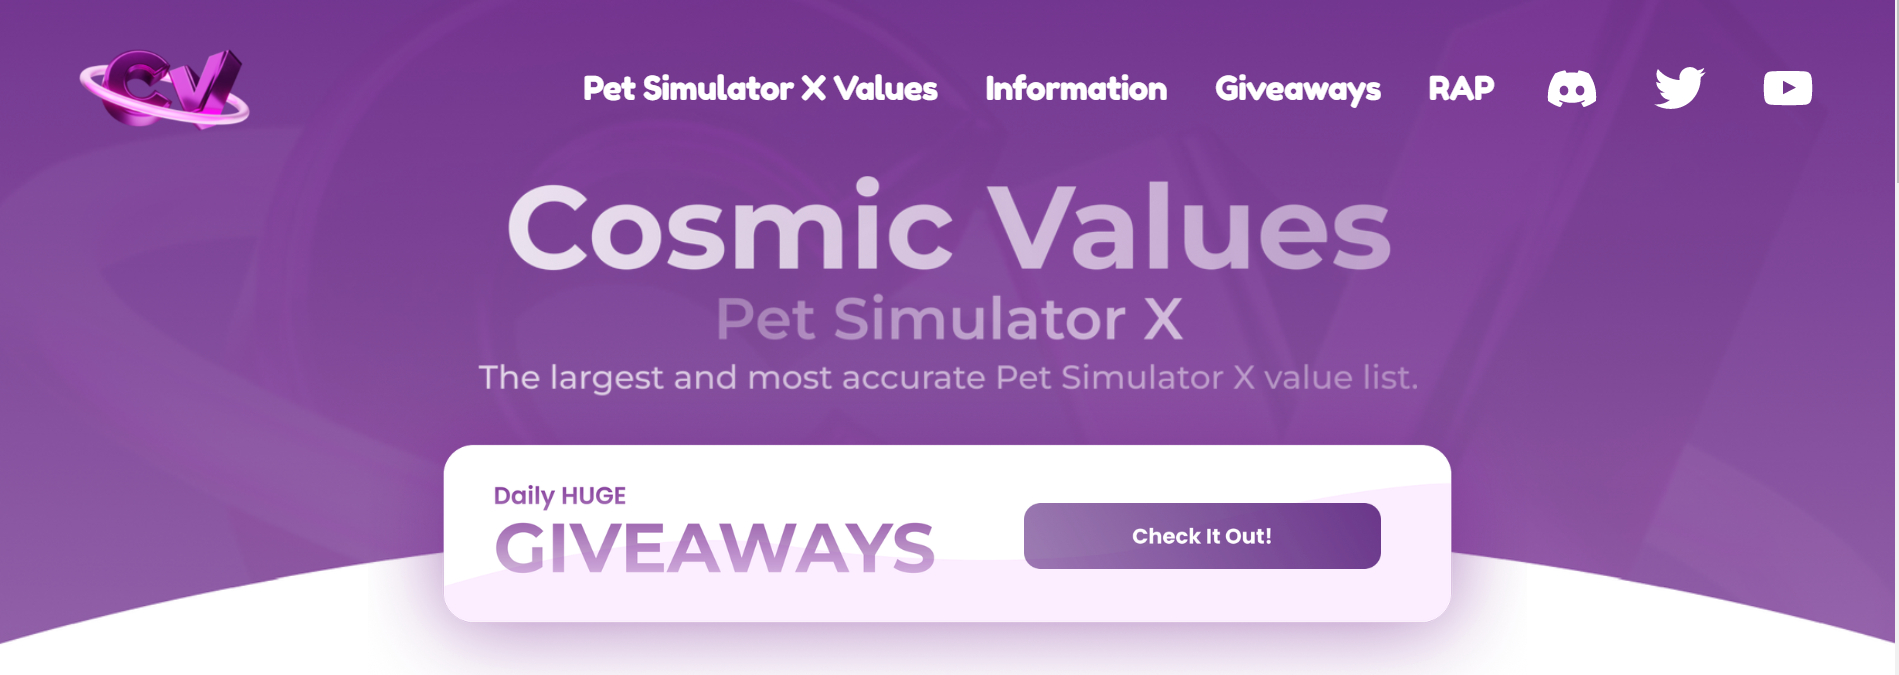 Using the Cosmic Values Website Correctly